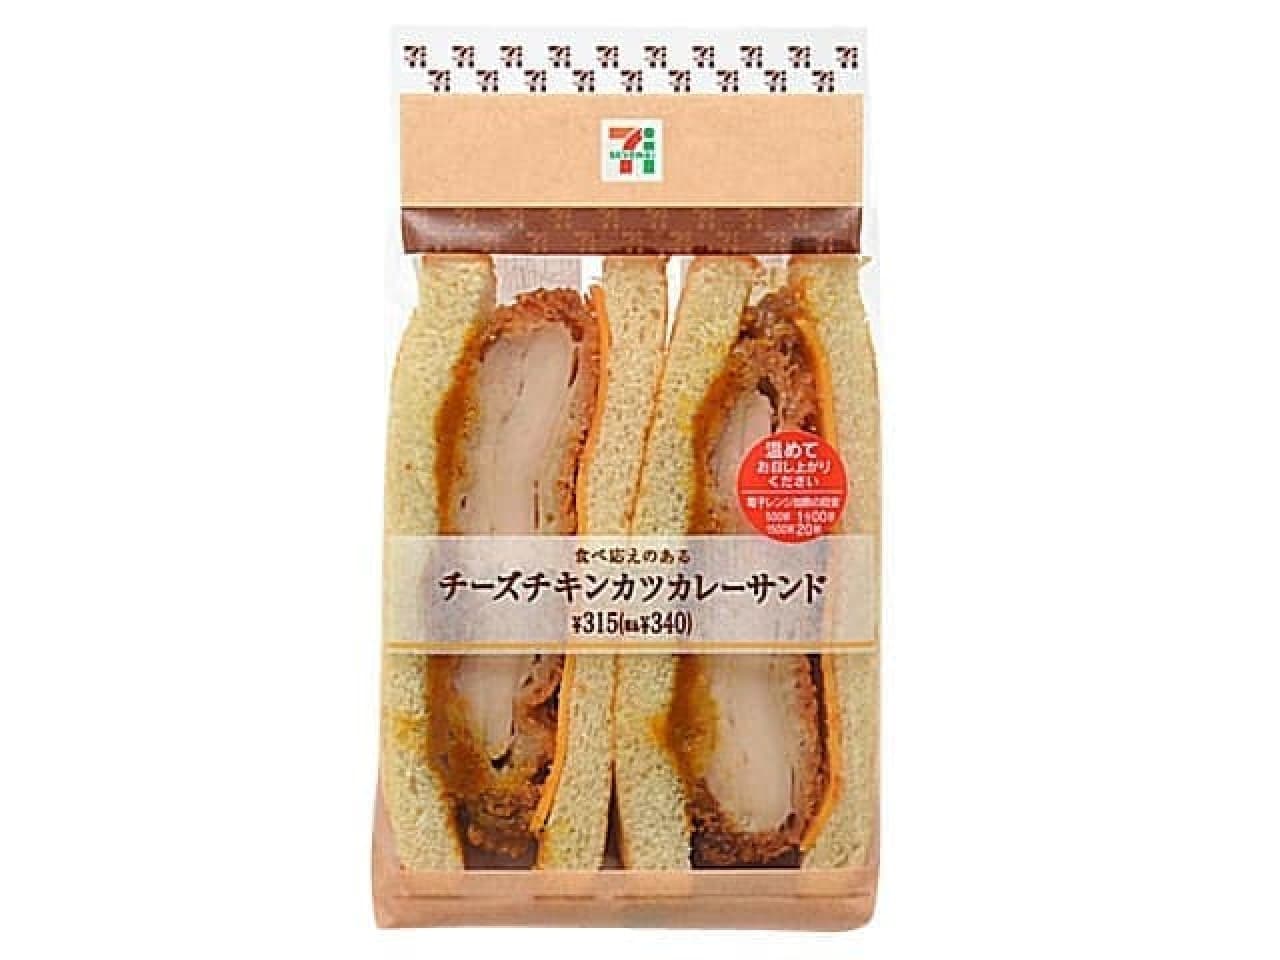 "Cheese chicken cutlet curry sandwich" at 7-ELEVEN